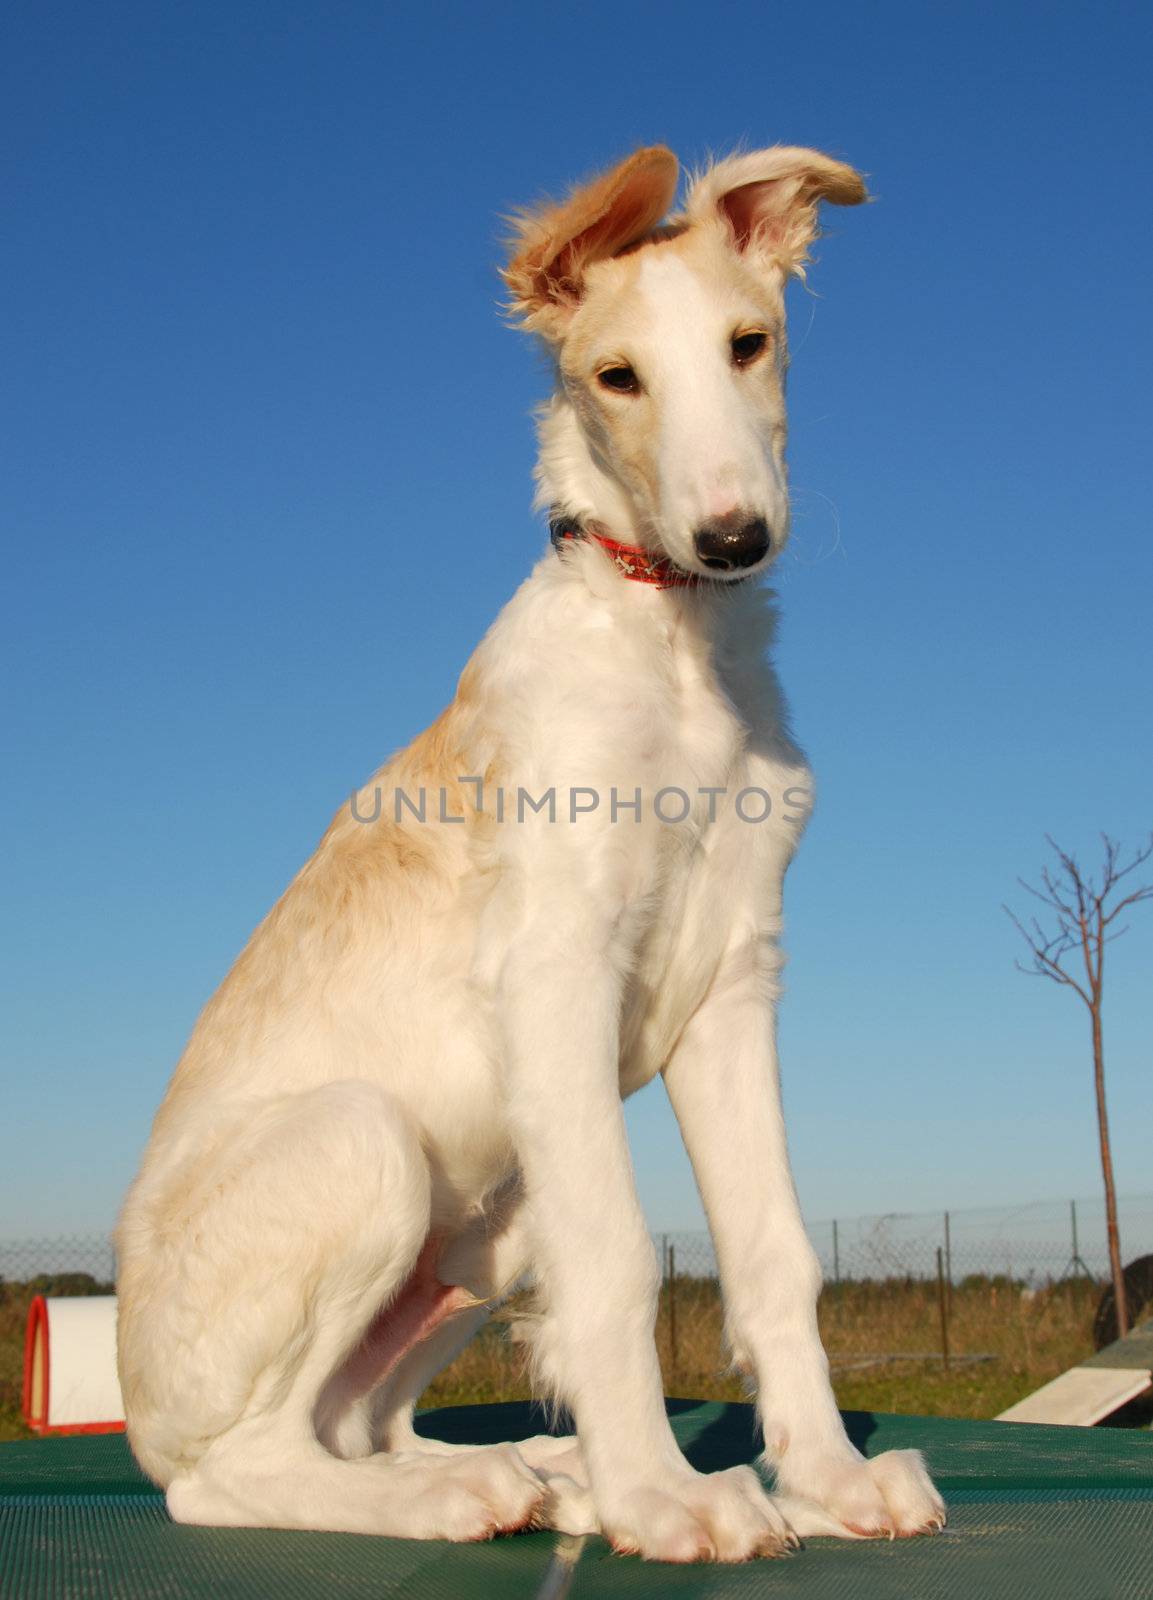 young puppy purebred greyhoung borzoi or russian wolfhound